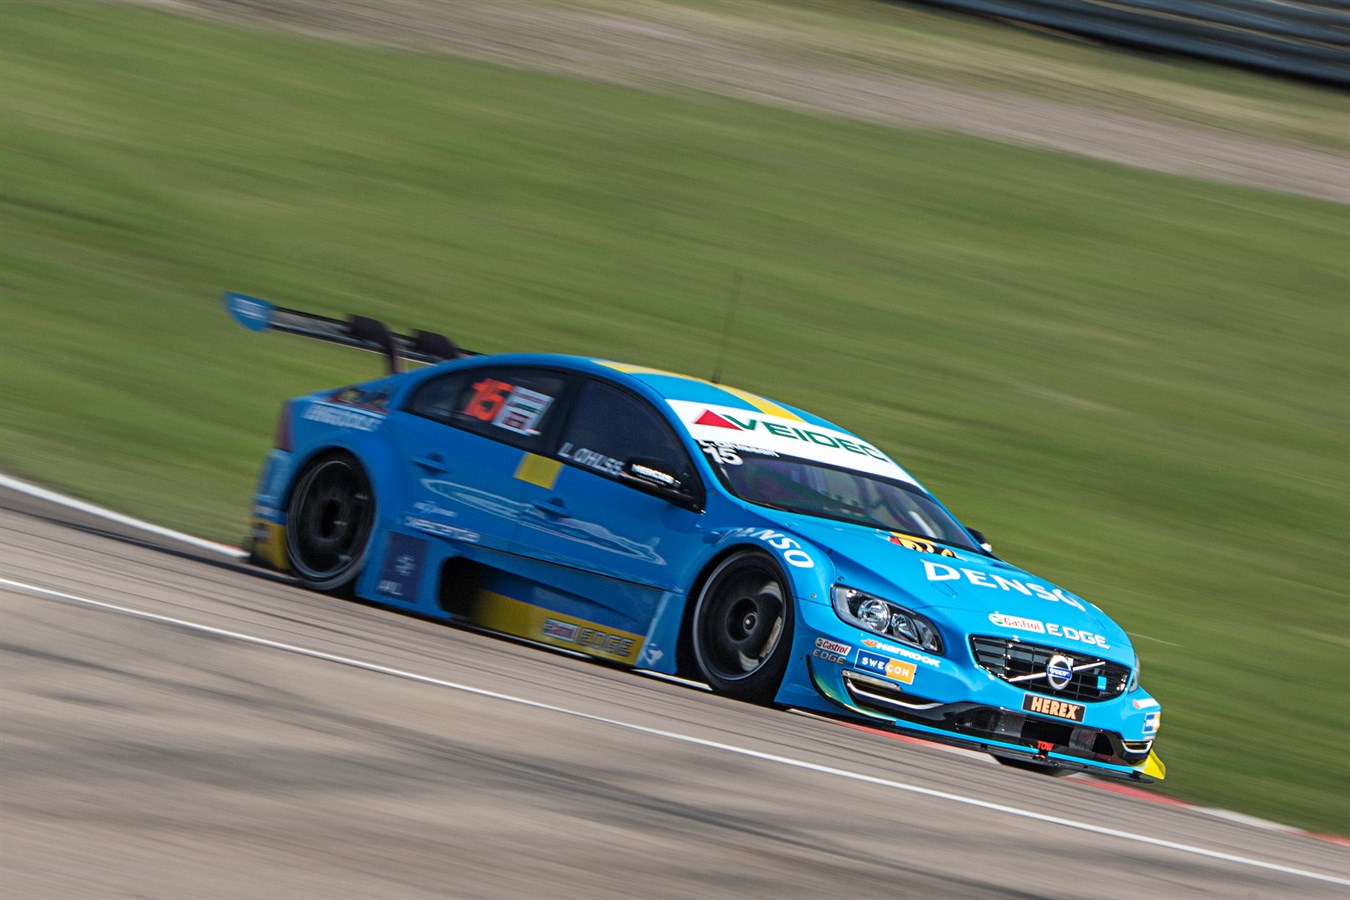 Volvo Polestar Racing at the 2013 STCC premiere at Knutstorp, Sweden